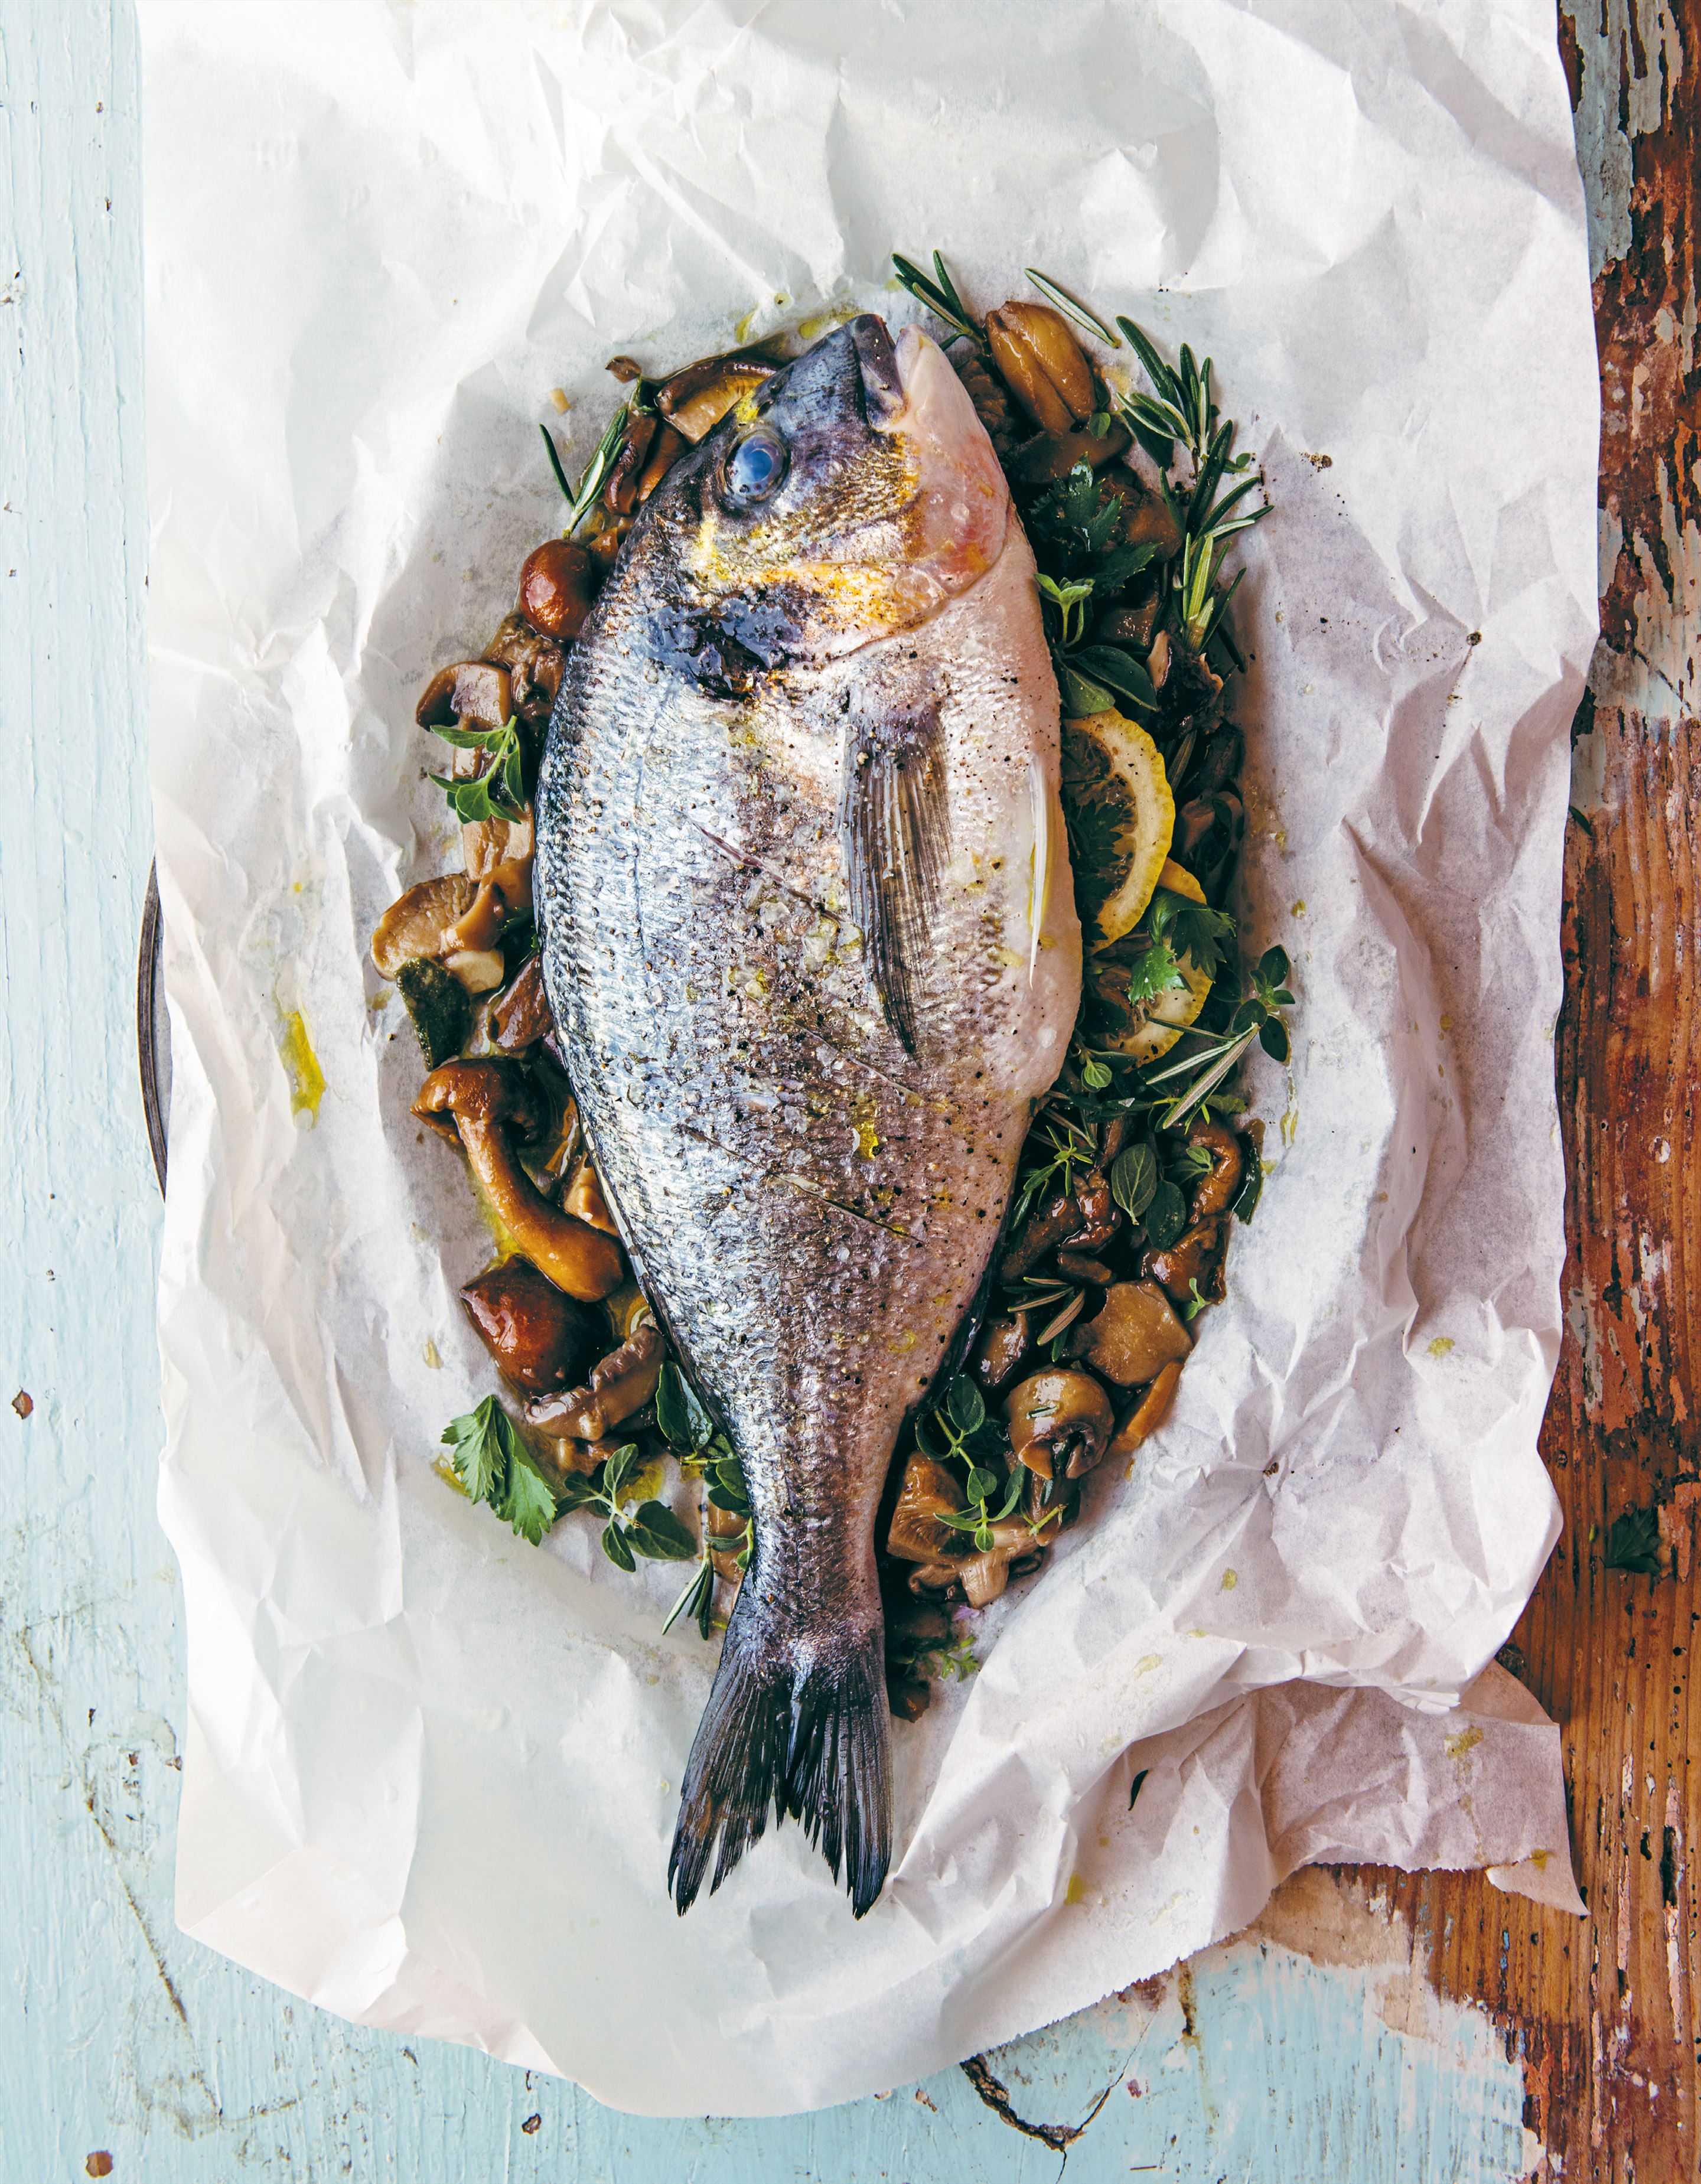 Paper-baked sea bream with mushrooms